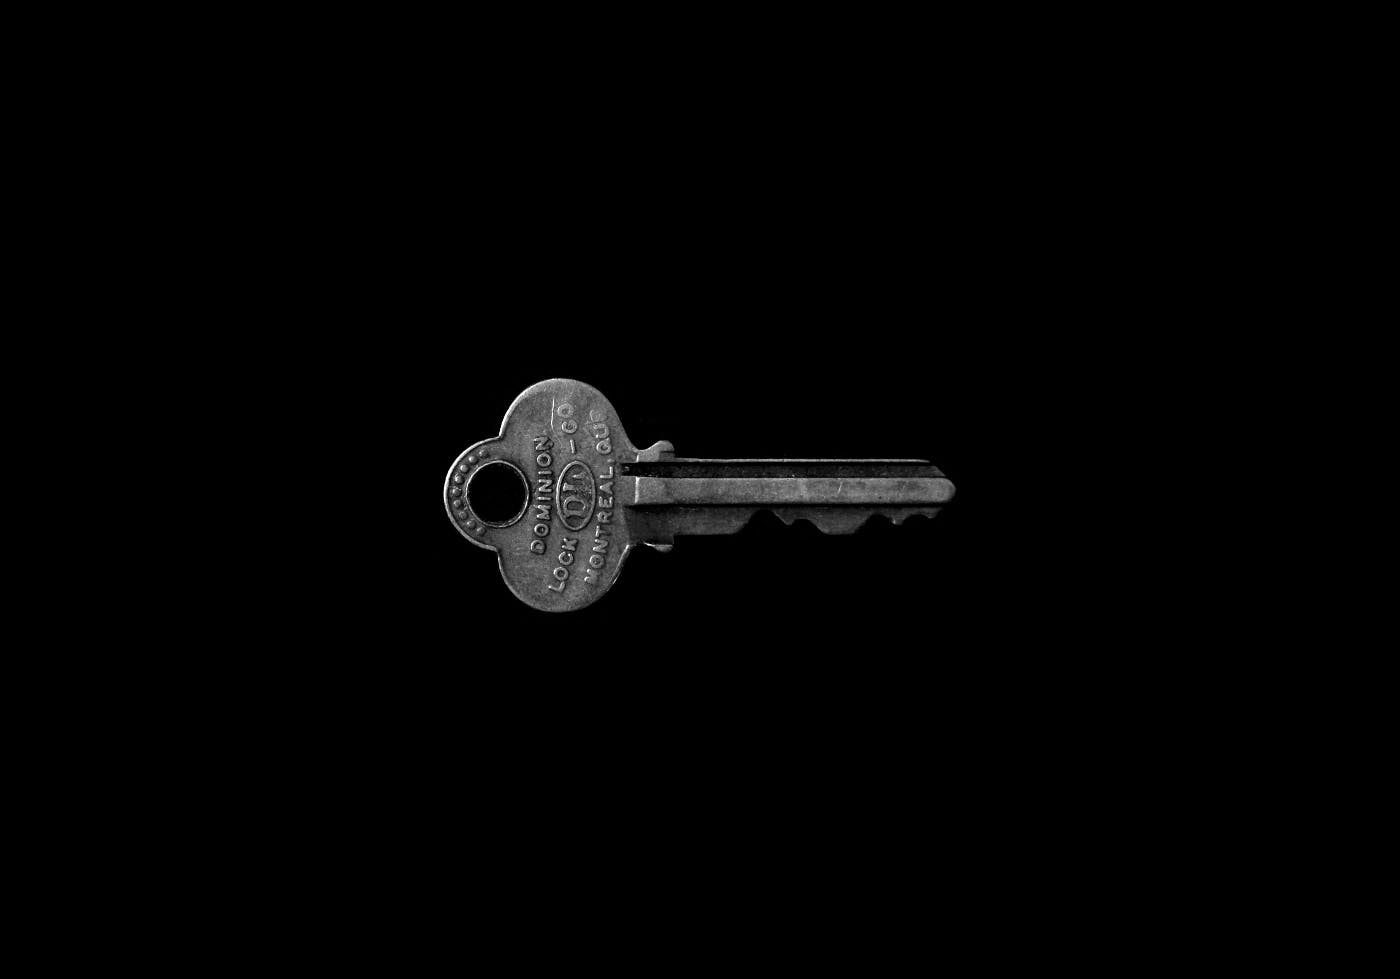 A silver key floating in blackness